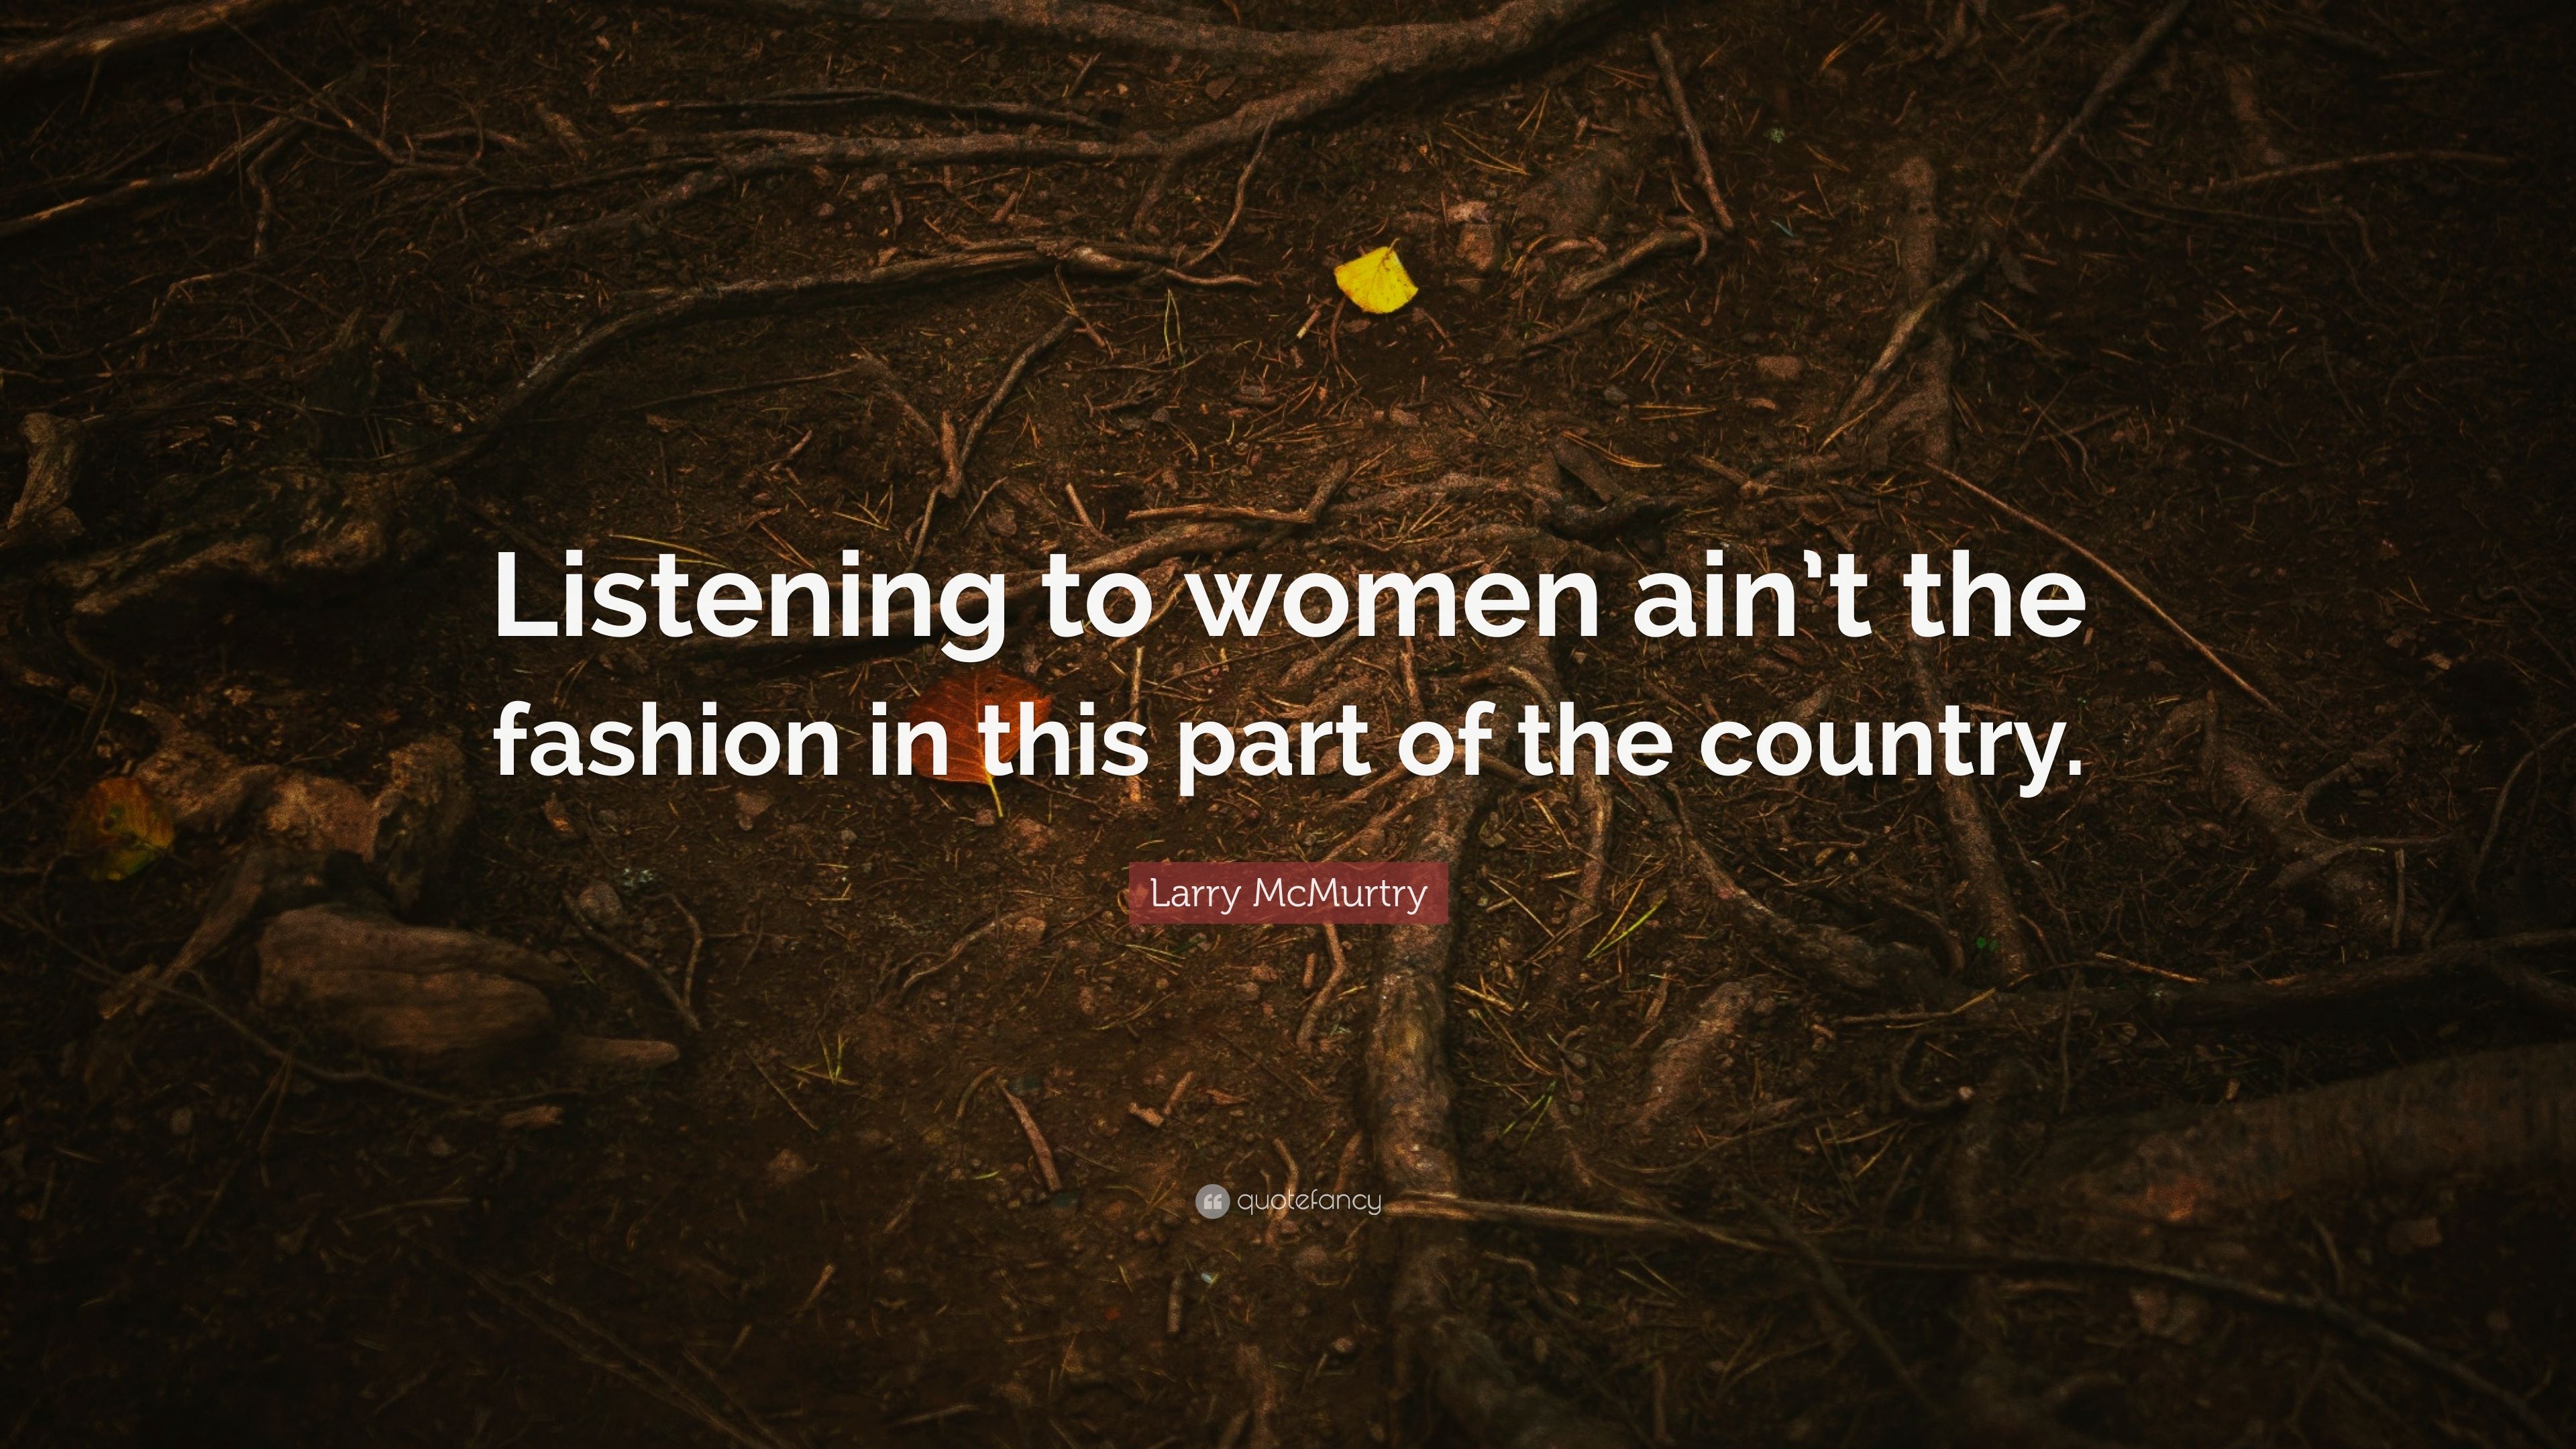 Larry McMurtry Quote: “Listening to women ain't the fashion